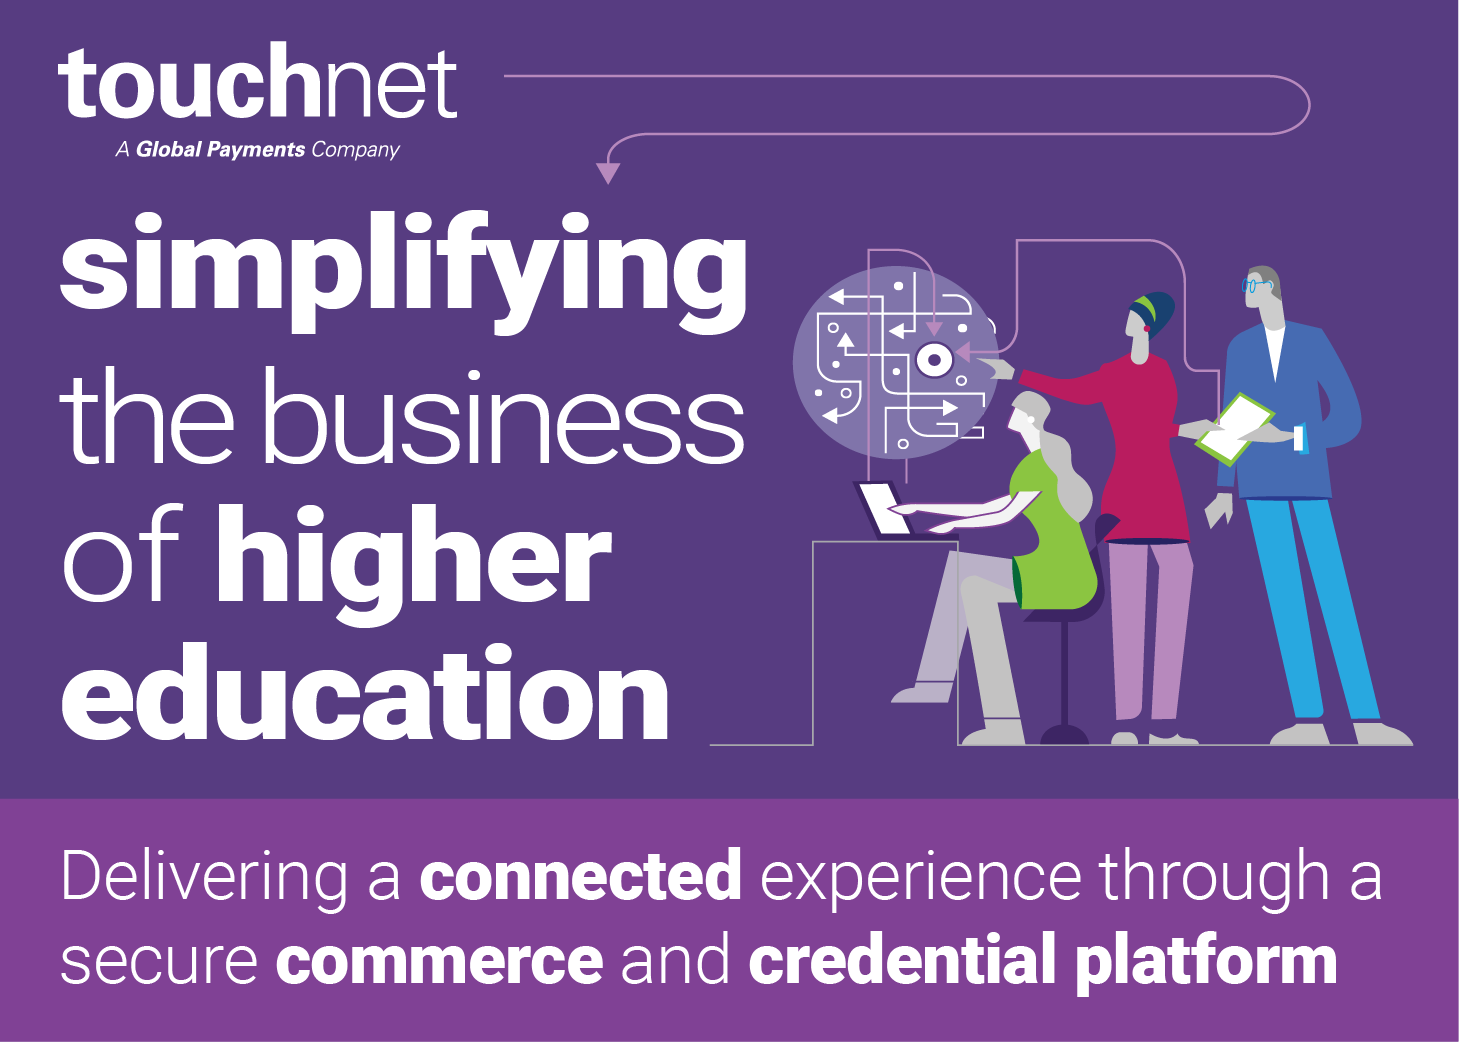 Simplifying teh business of higher education. Touchnet.